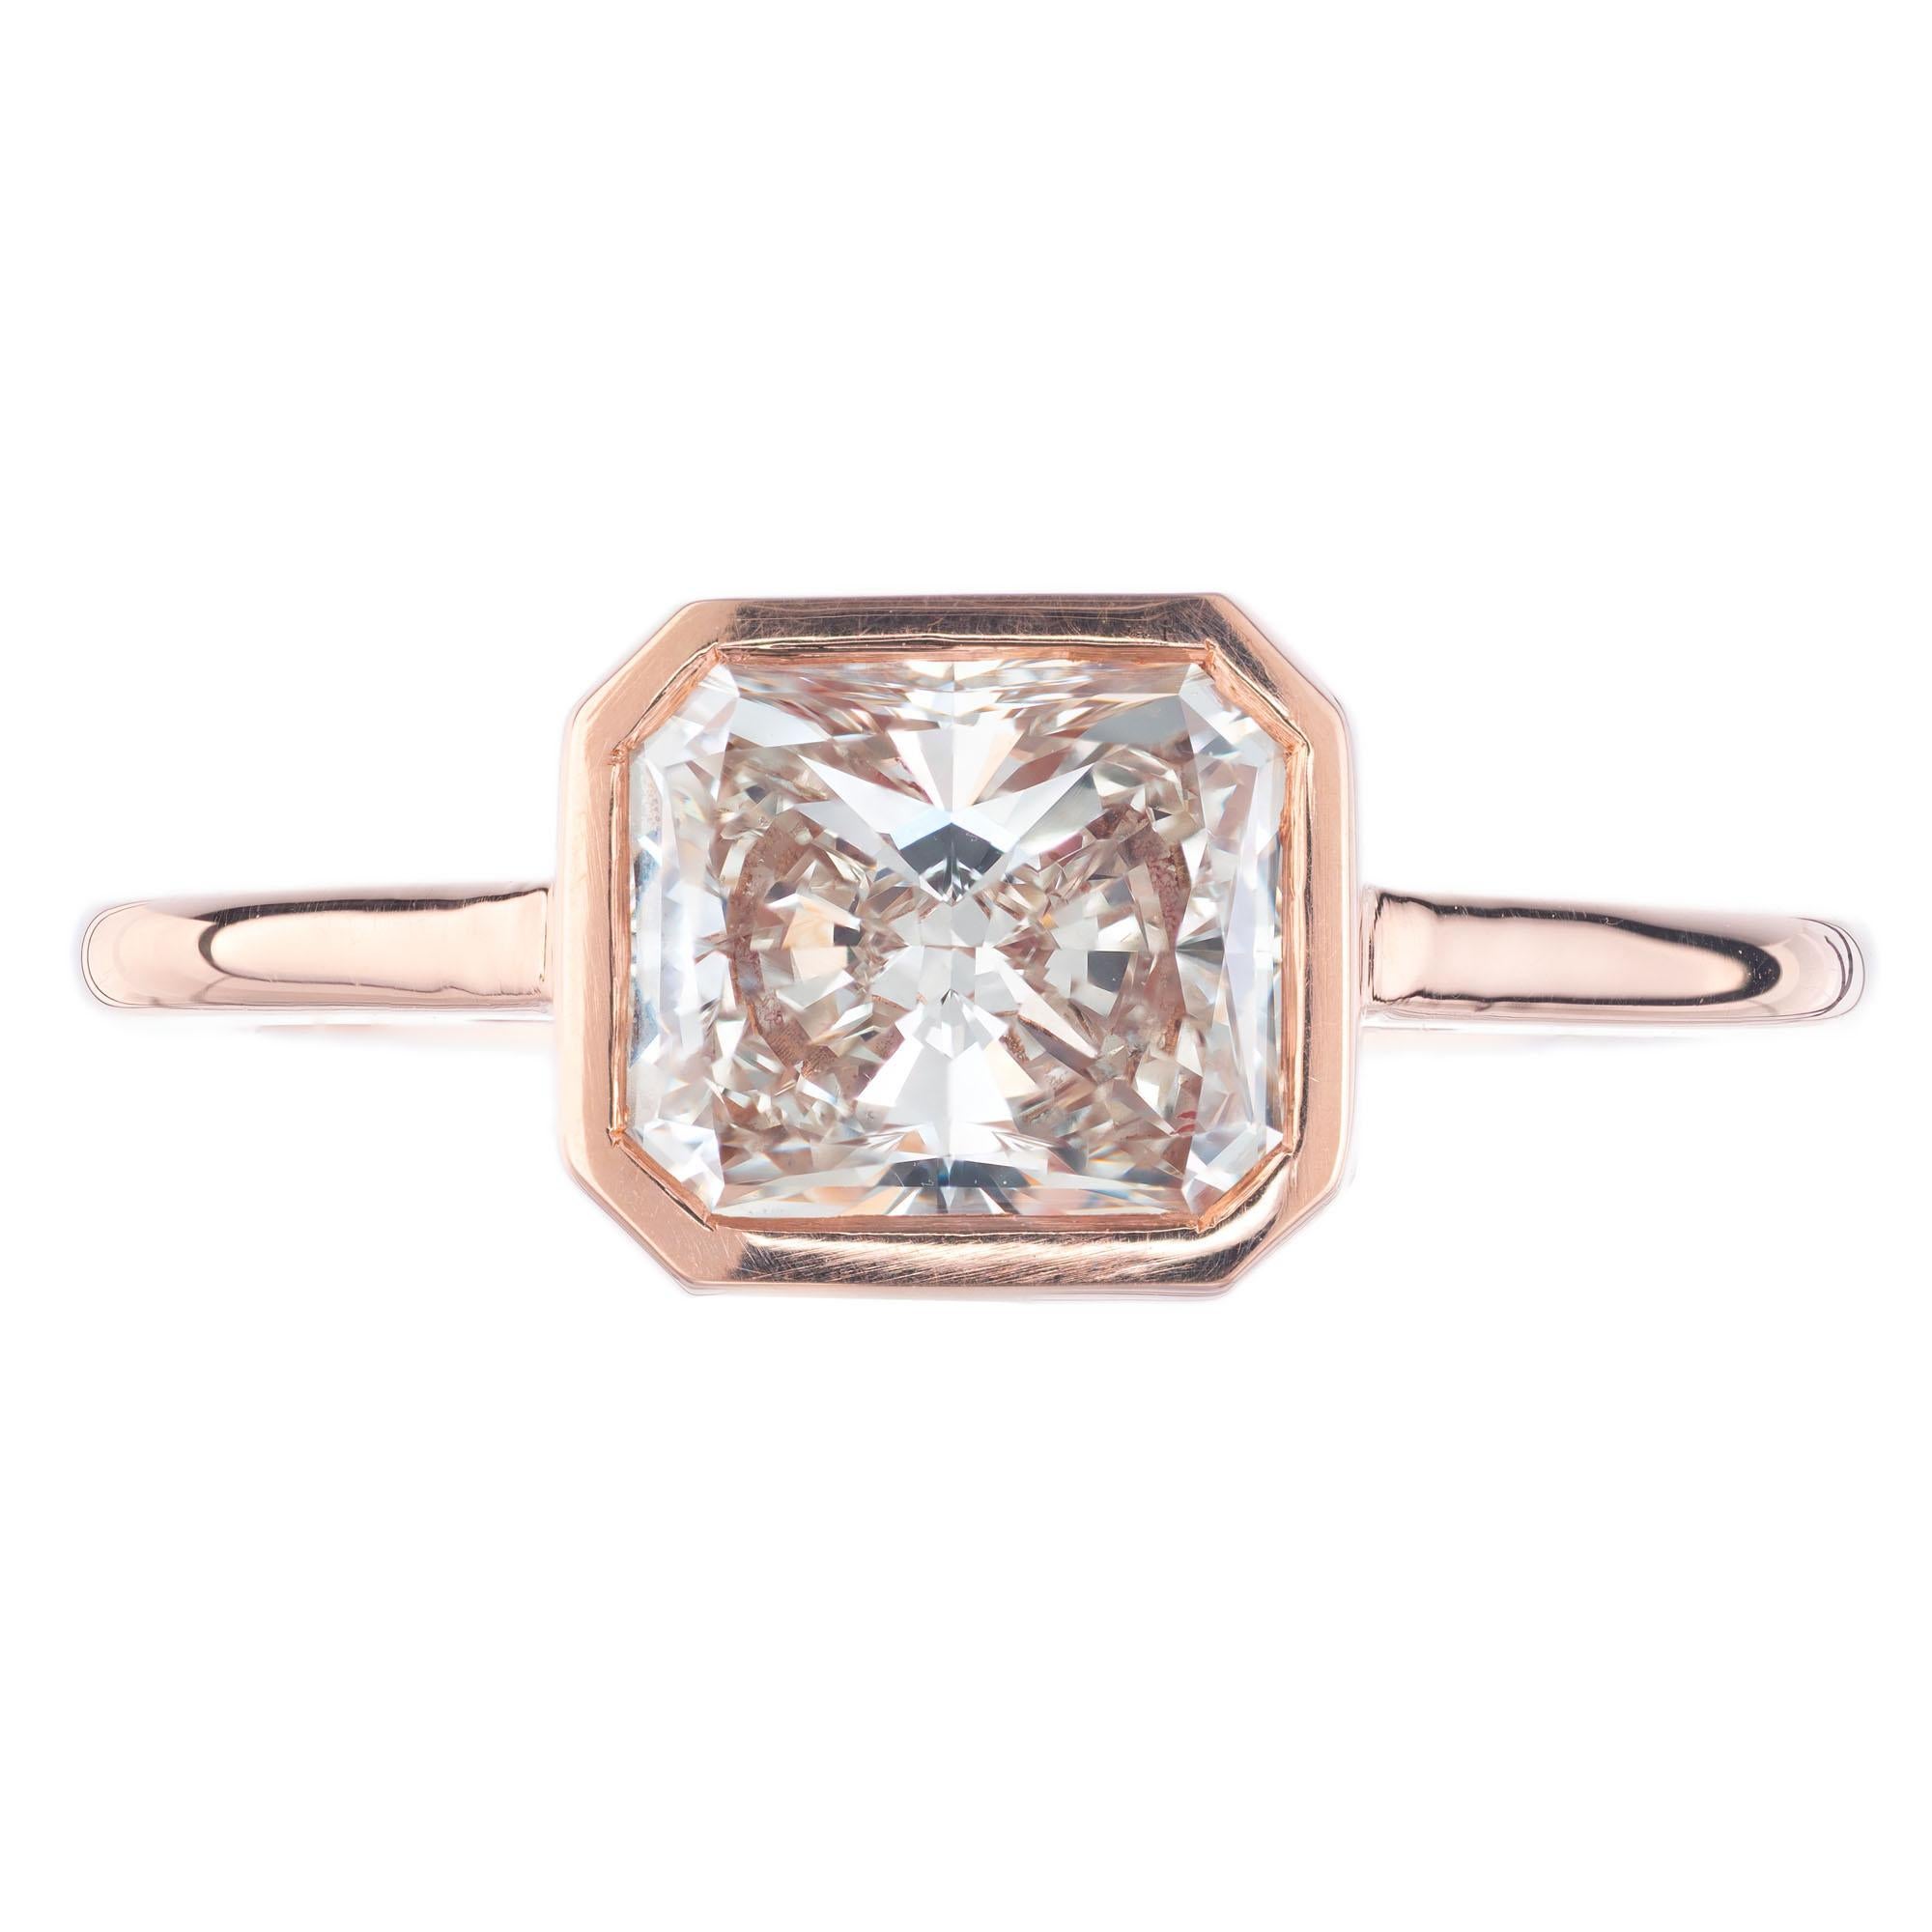 GIA certifed cut-cornered rectangular modified brilliant cut diamond engagement ring in a 14k rose gold solitaire setting, crafted in the Peter Suchy Workshop. Alternative design to fit flush with a wedding band. 

1 cut cornered rectangular